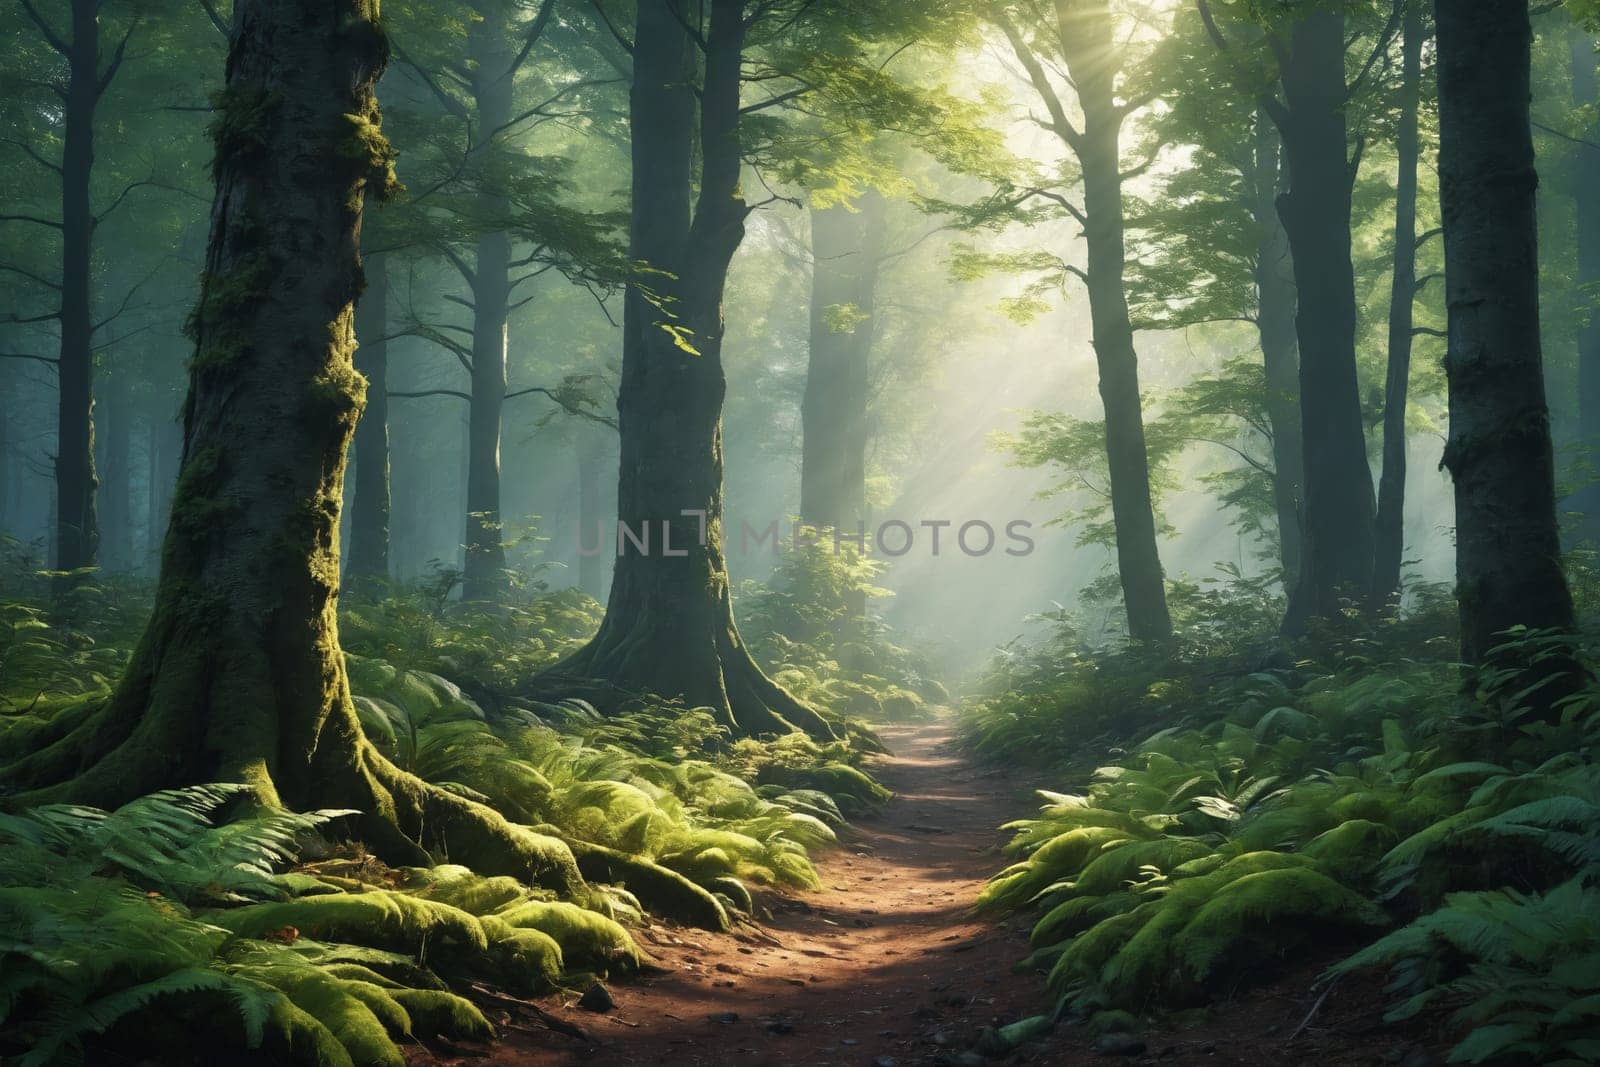 This mesmerizing image captures a sunlit path through a beautiful forest, emblematic of hope, journey, and natural beauty. Ideal for inspirational quotes, nature posts, or travel blogs.